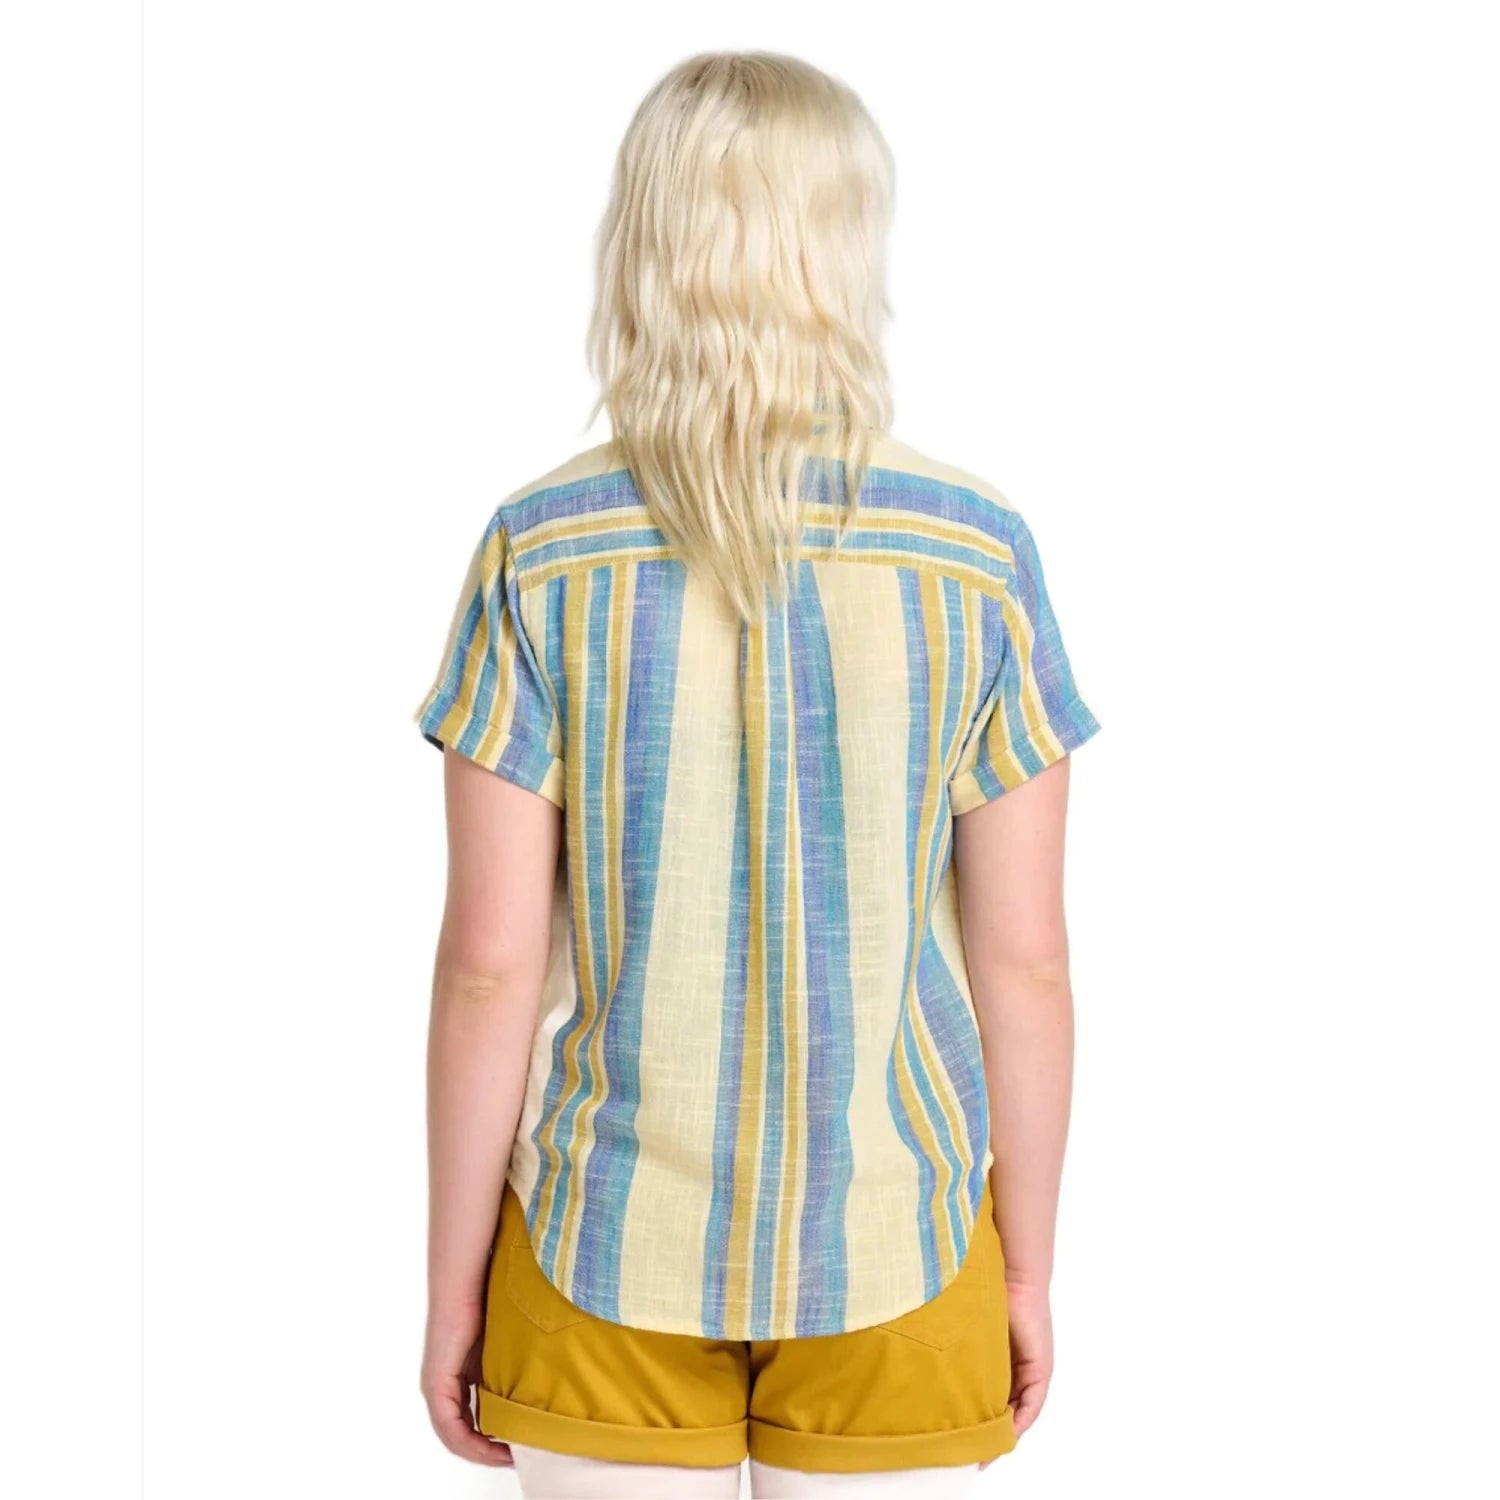 Toad&Co W's Camp Cove Short Sleeve Shirt, Barley Stripe, back view on model